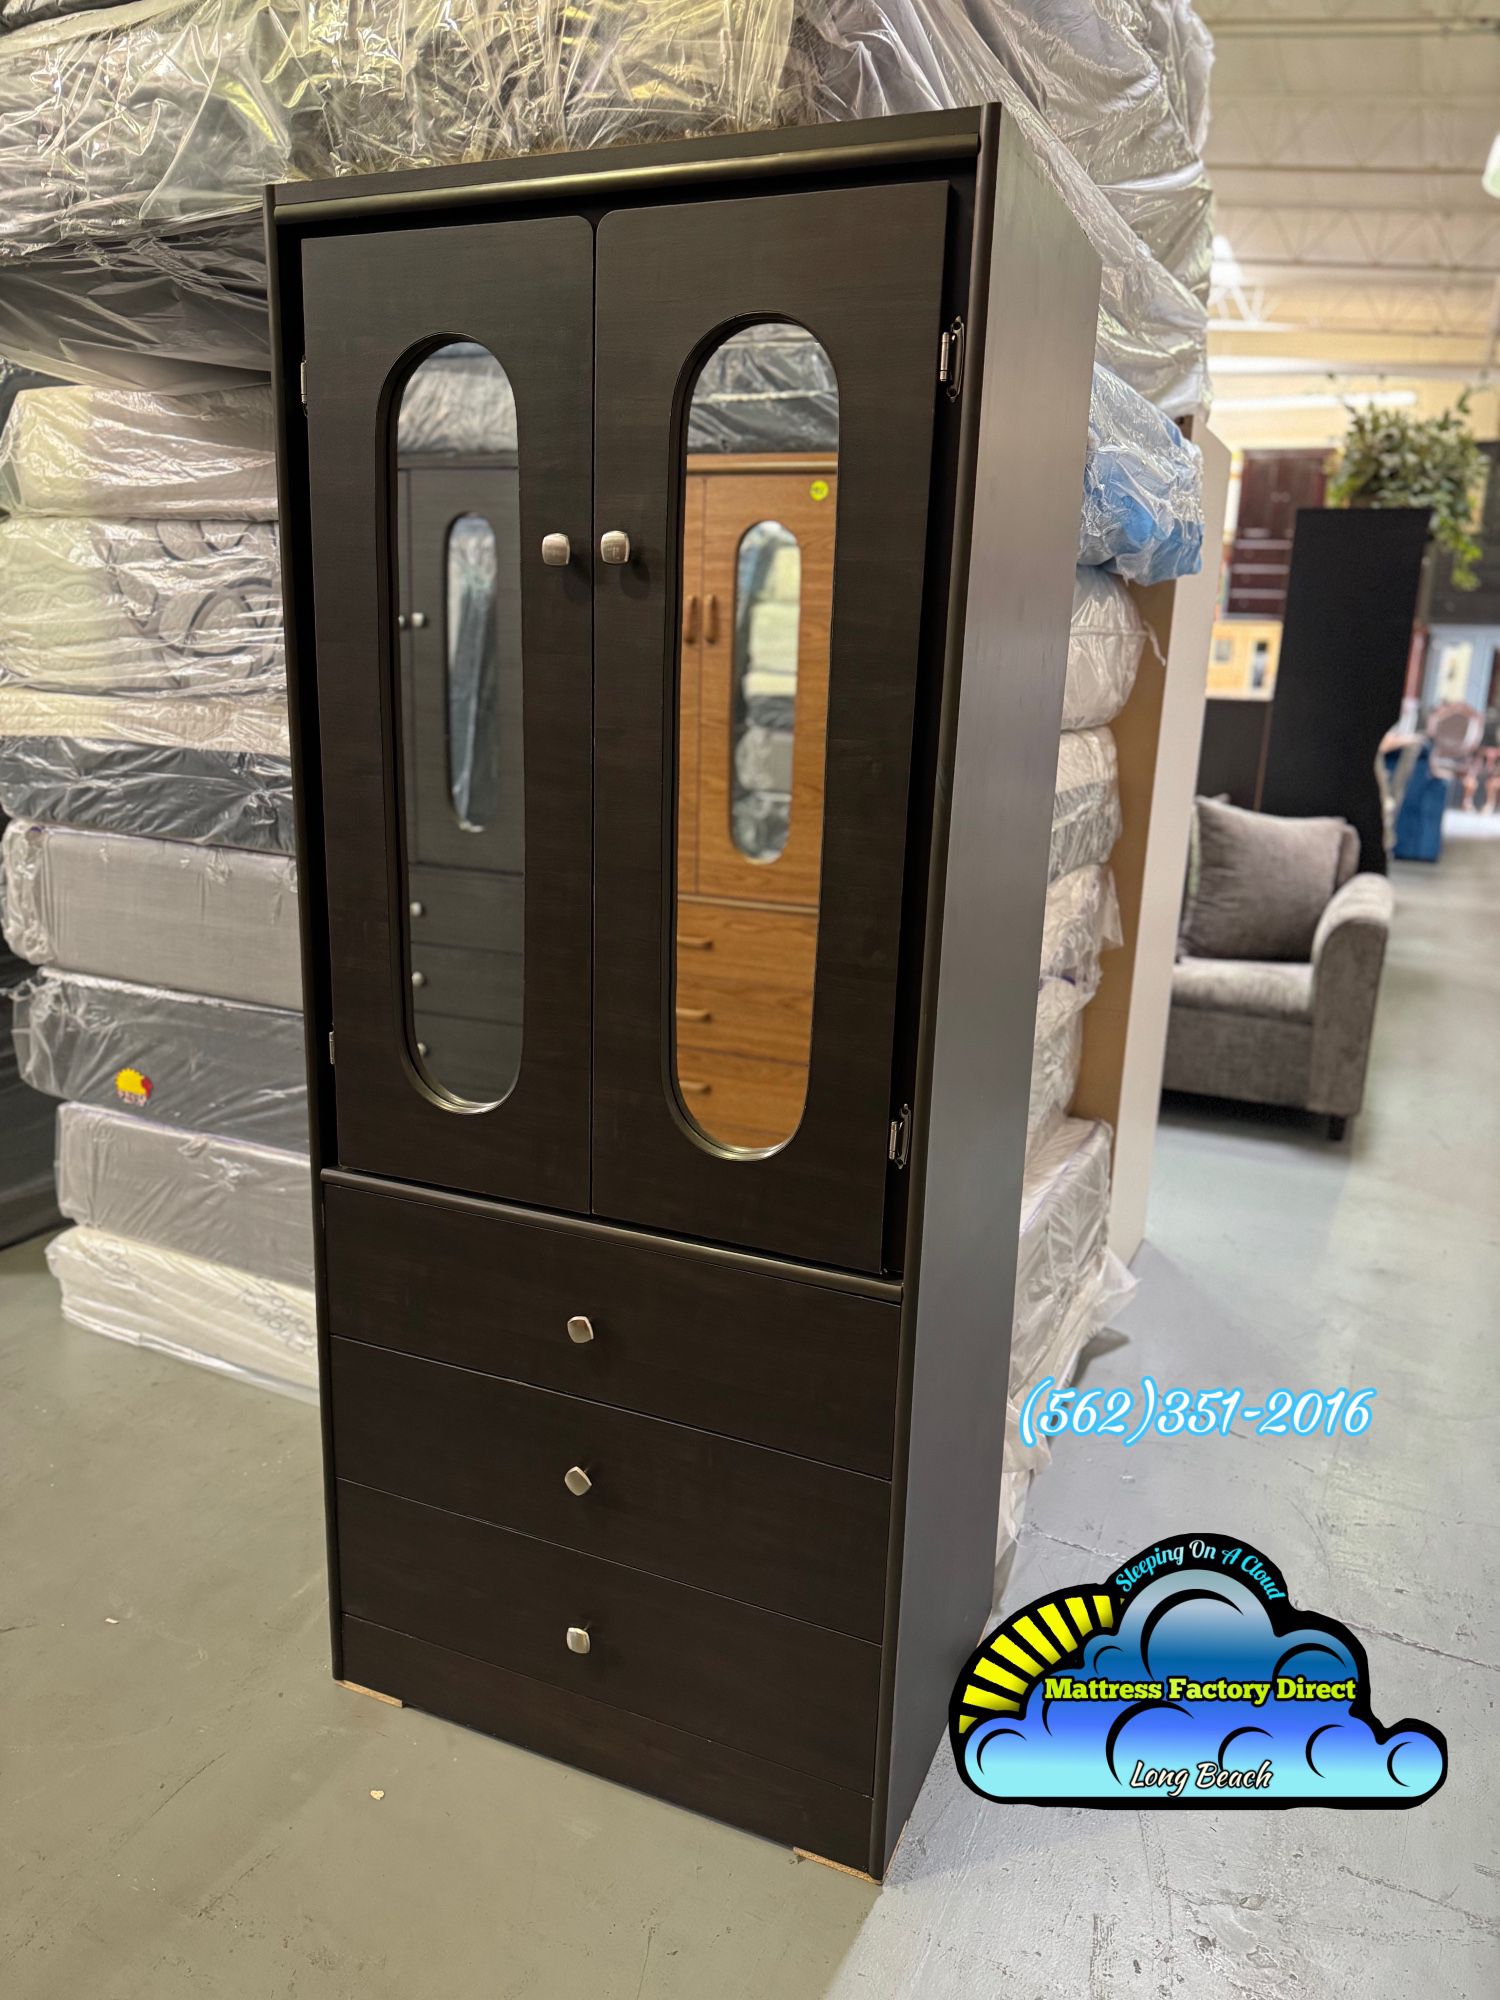 New Dark Brown Expresso Wood Tall Closet Wardrobe With Mirror And Three Drawers 